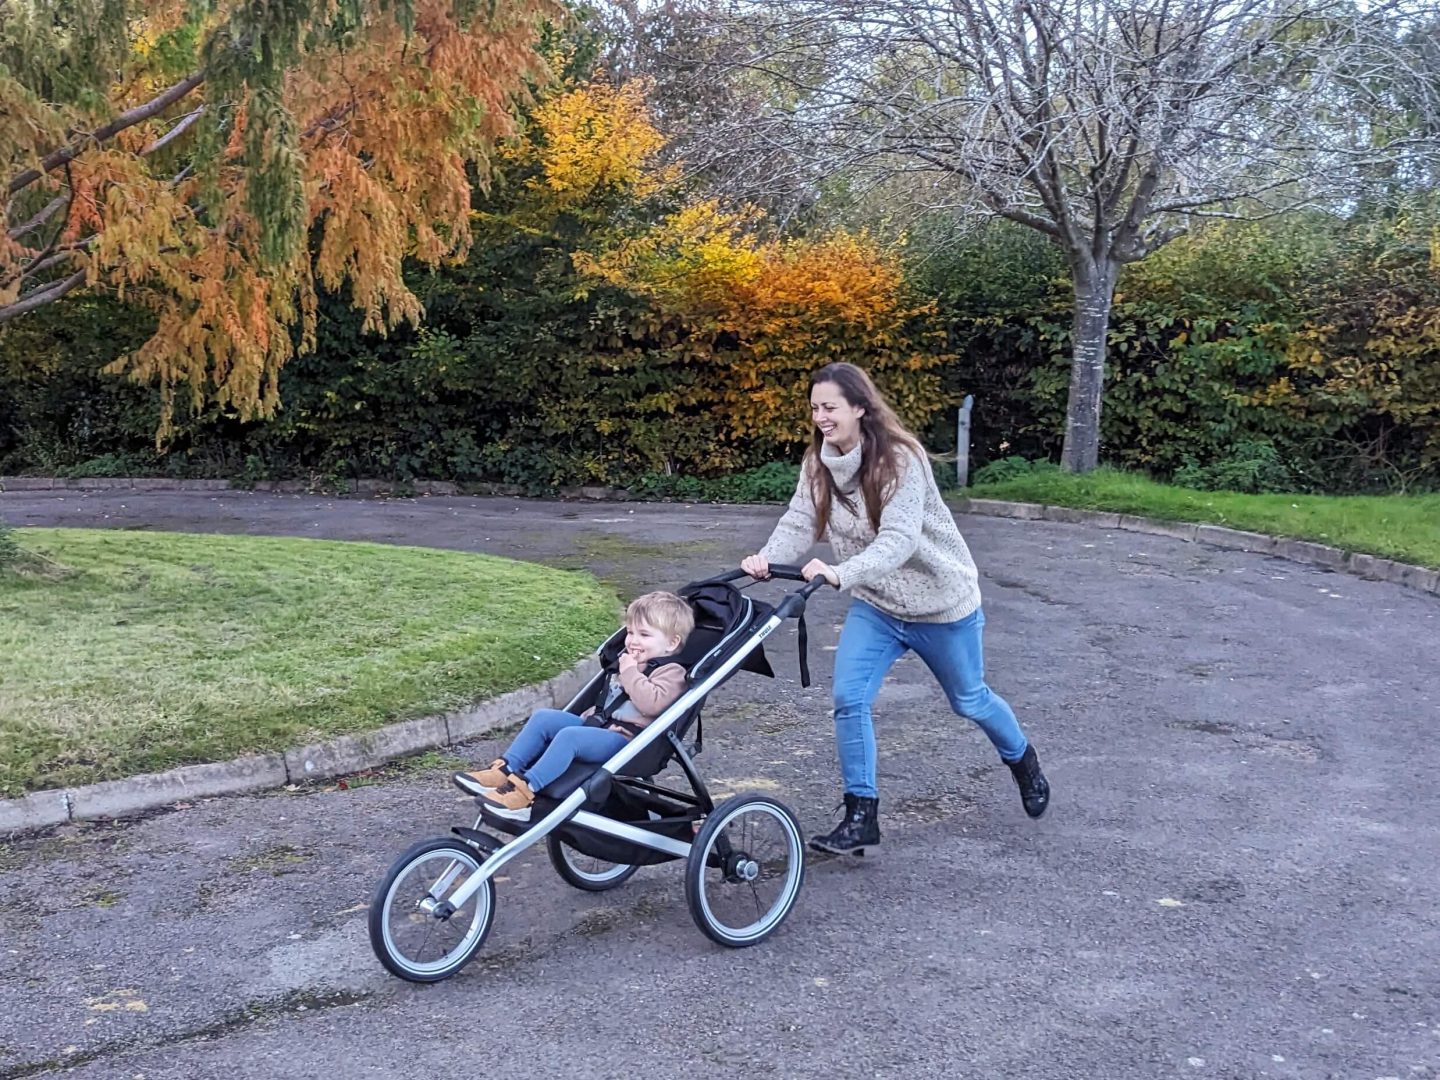 Natalie running around a road roundabout pushing a running buggy with her nephew in, both are smiling and trees in the background have red and orange autumn leaves